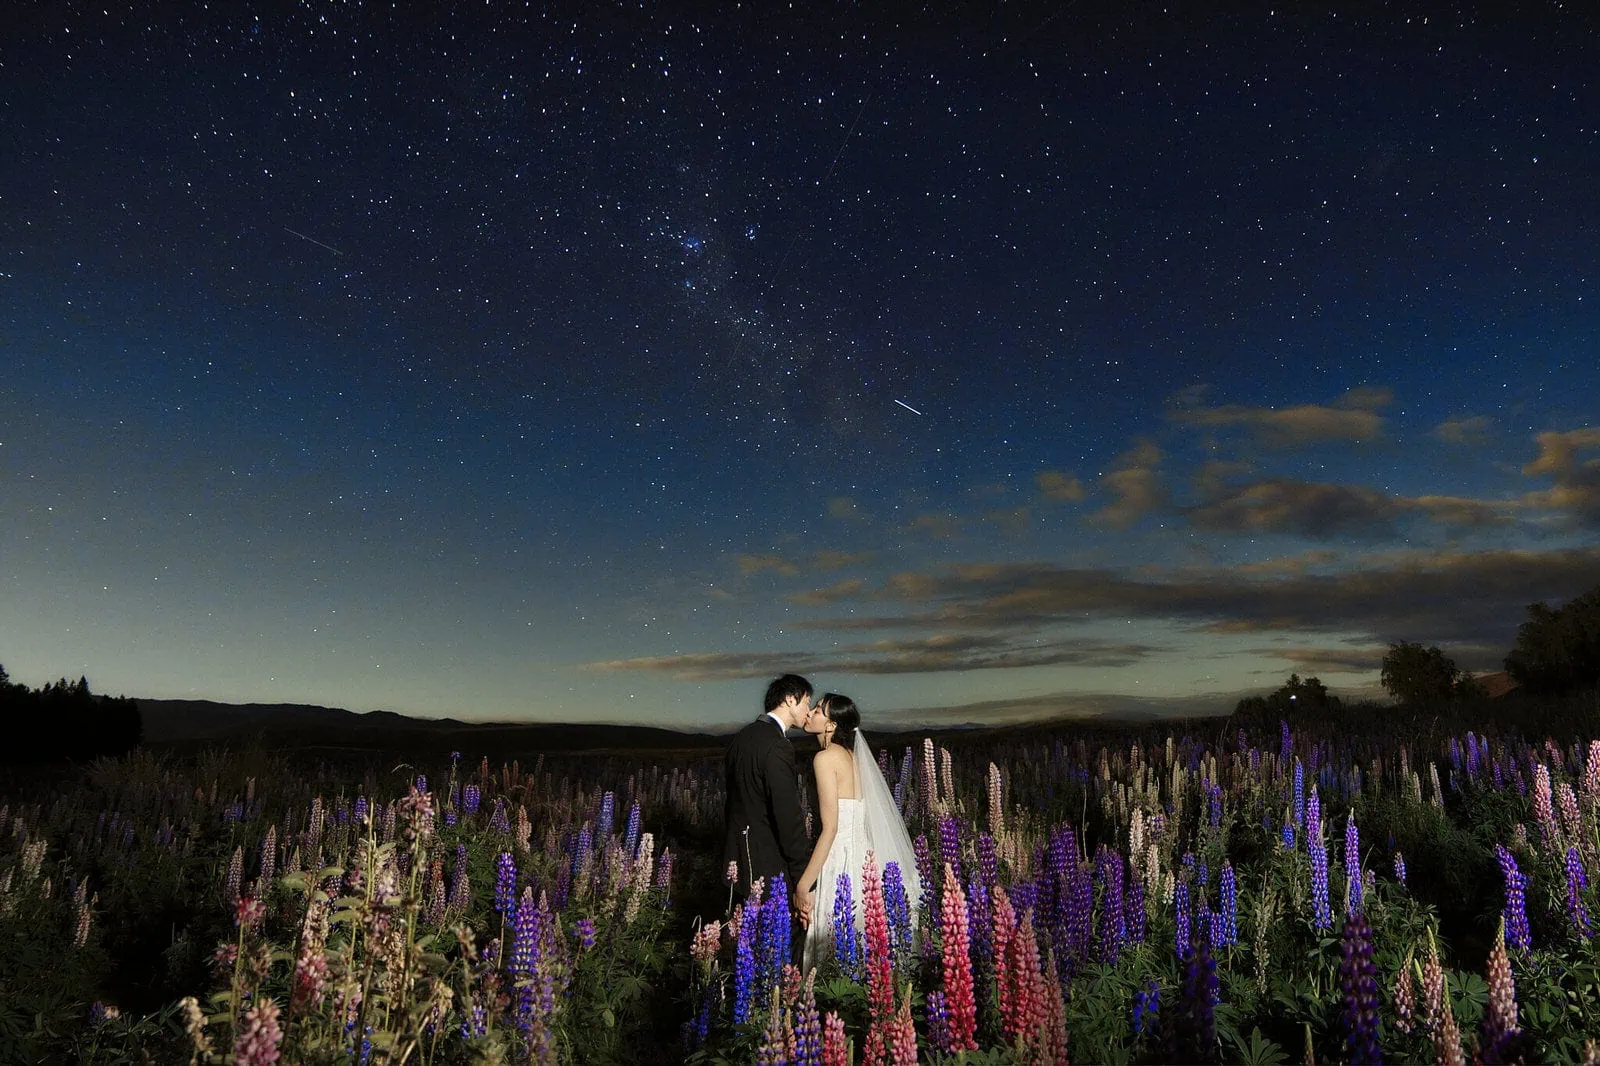 Queenstown New Zealand Elopement Wedding Photographer - A bride and groom embrace passionately under the starry night sky in a field of wildflowers, capturing a dreamy moment for their portfolio shoot.